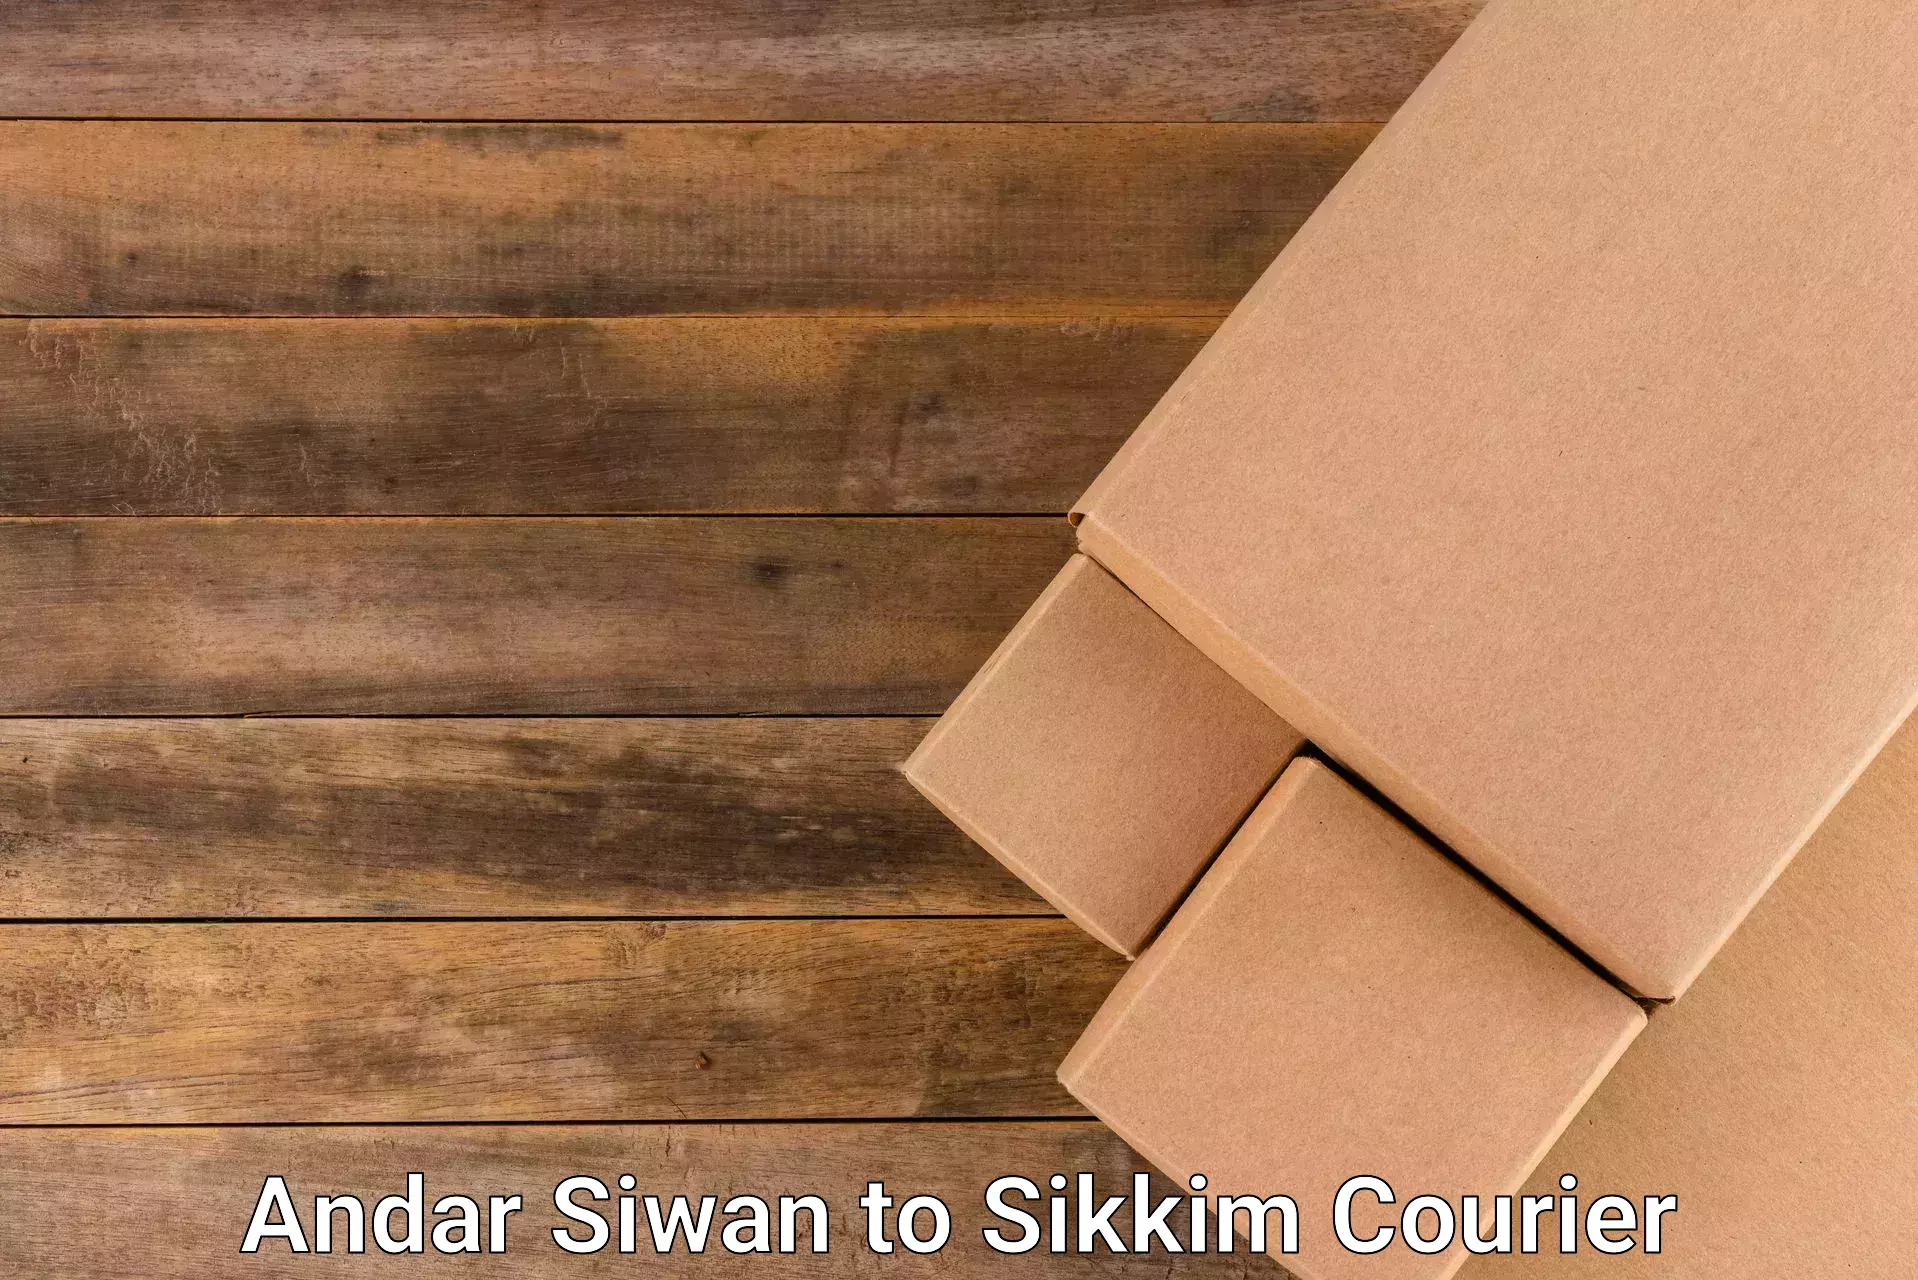 Courier service partnerships Andar Siwan to Sikkim